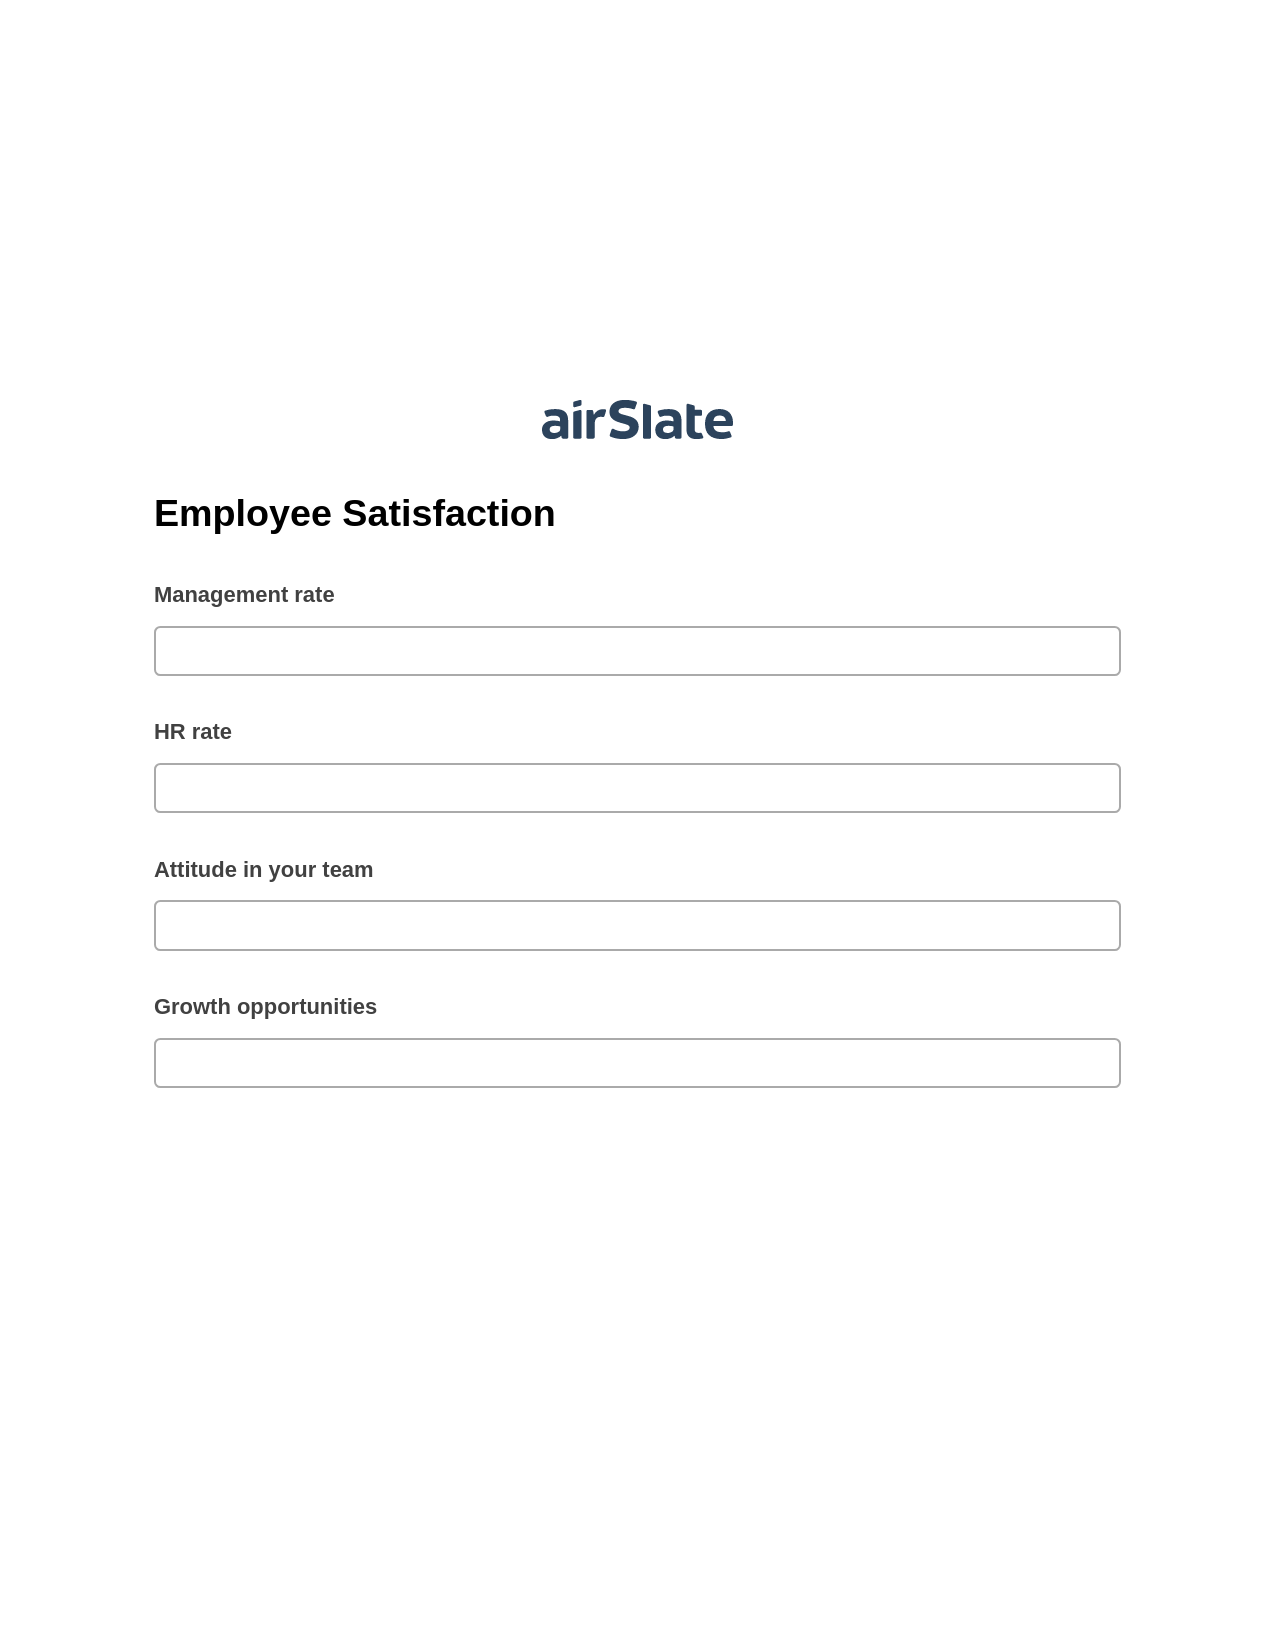 Employee Satisfaction Pre-fill Dropdowns from CSV File Bot, Assign Slate Name Bot, Export to MySQL Bot